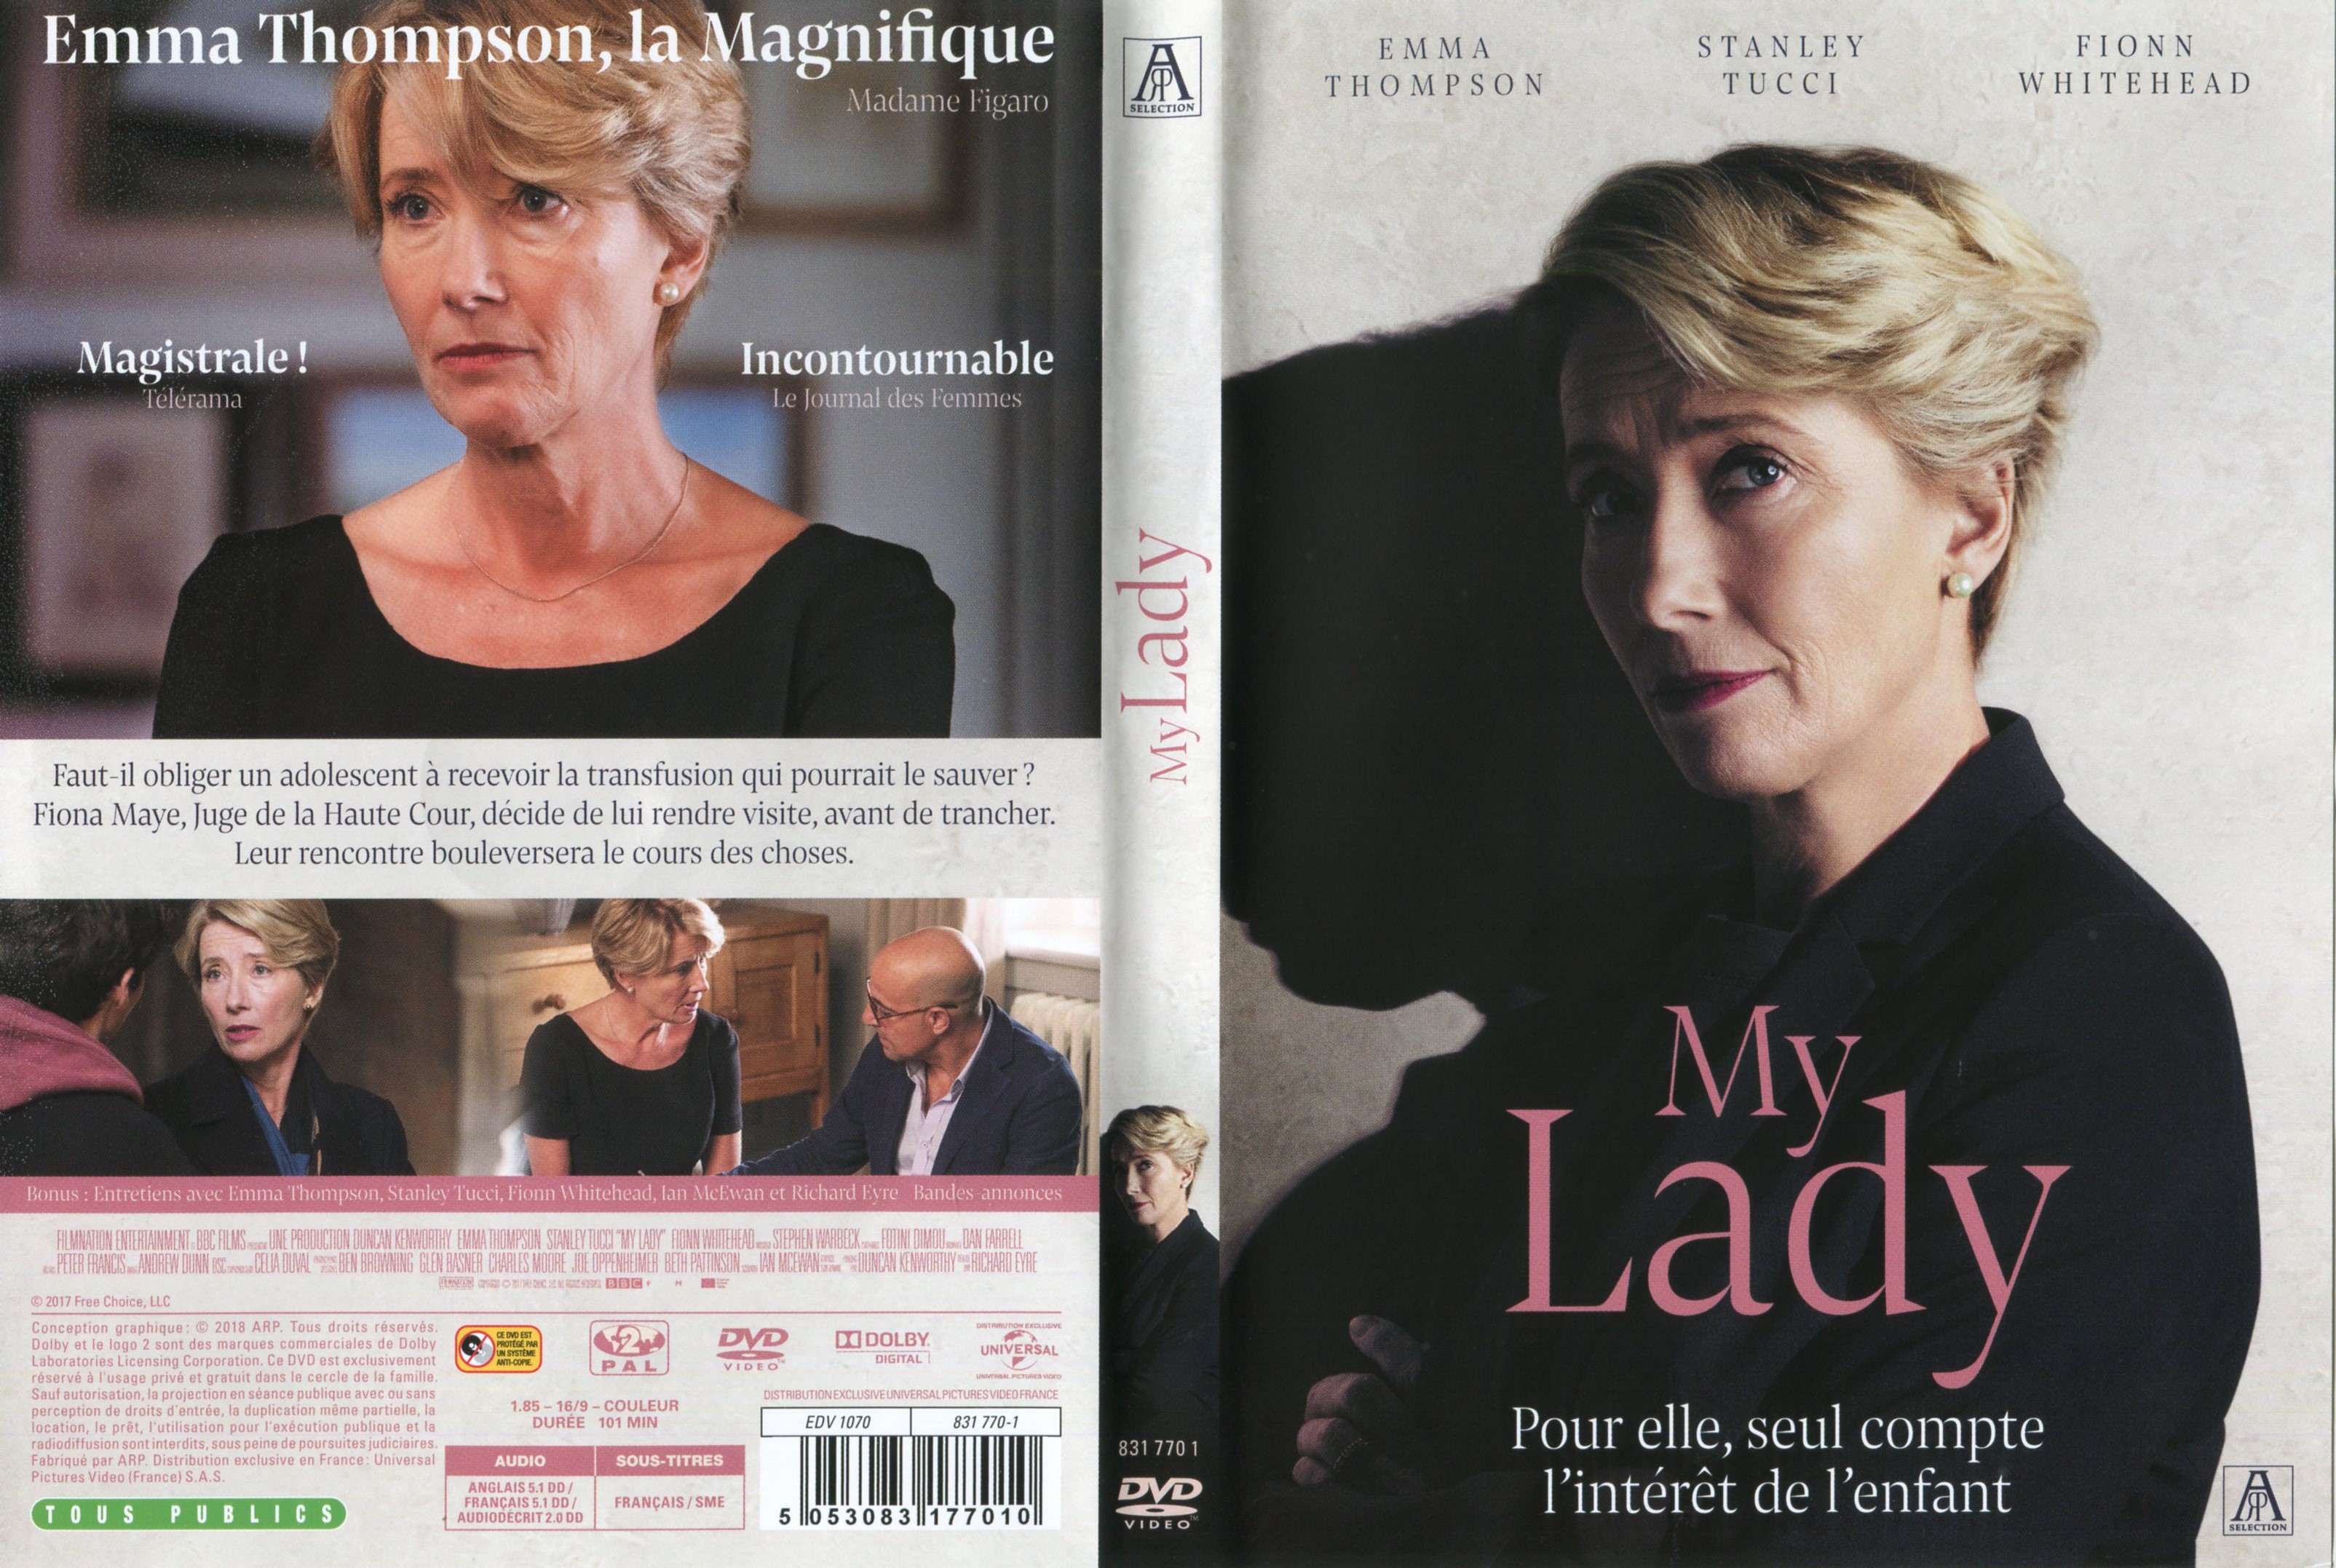 Jaquette DVD My Lady